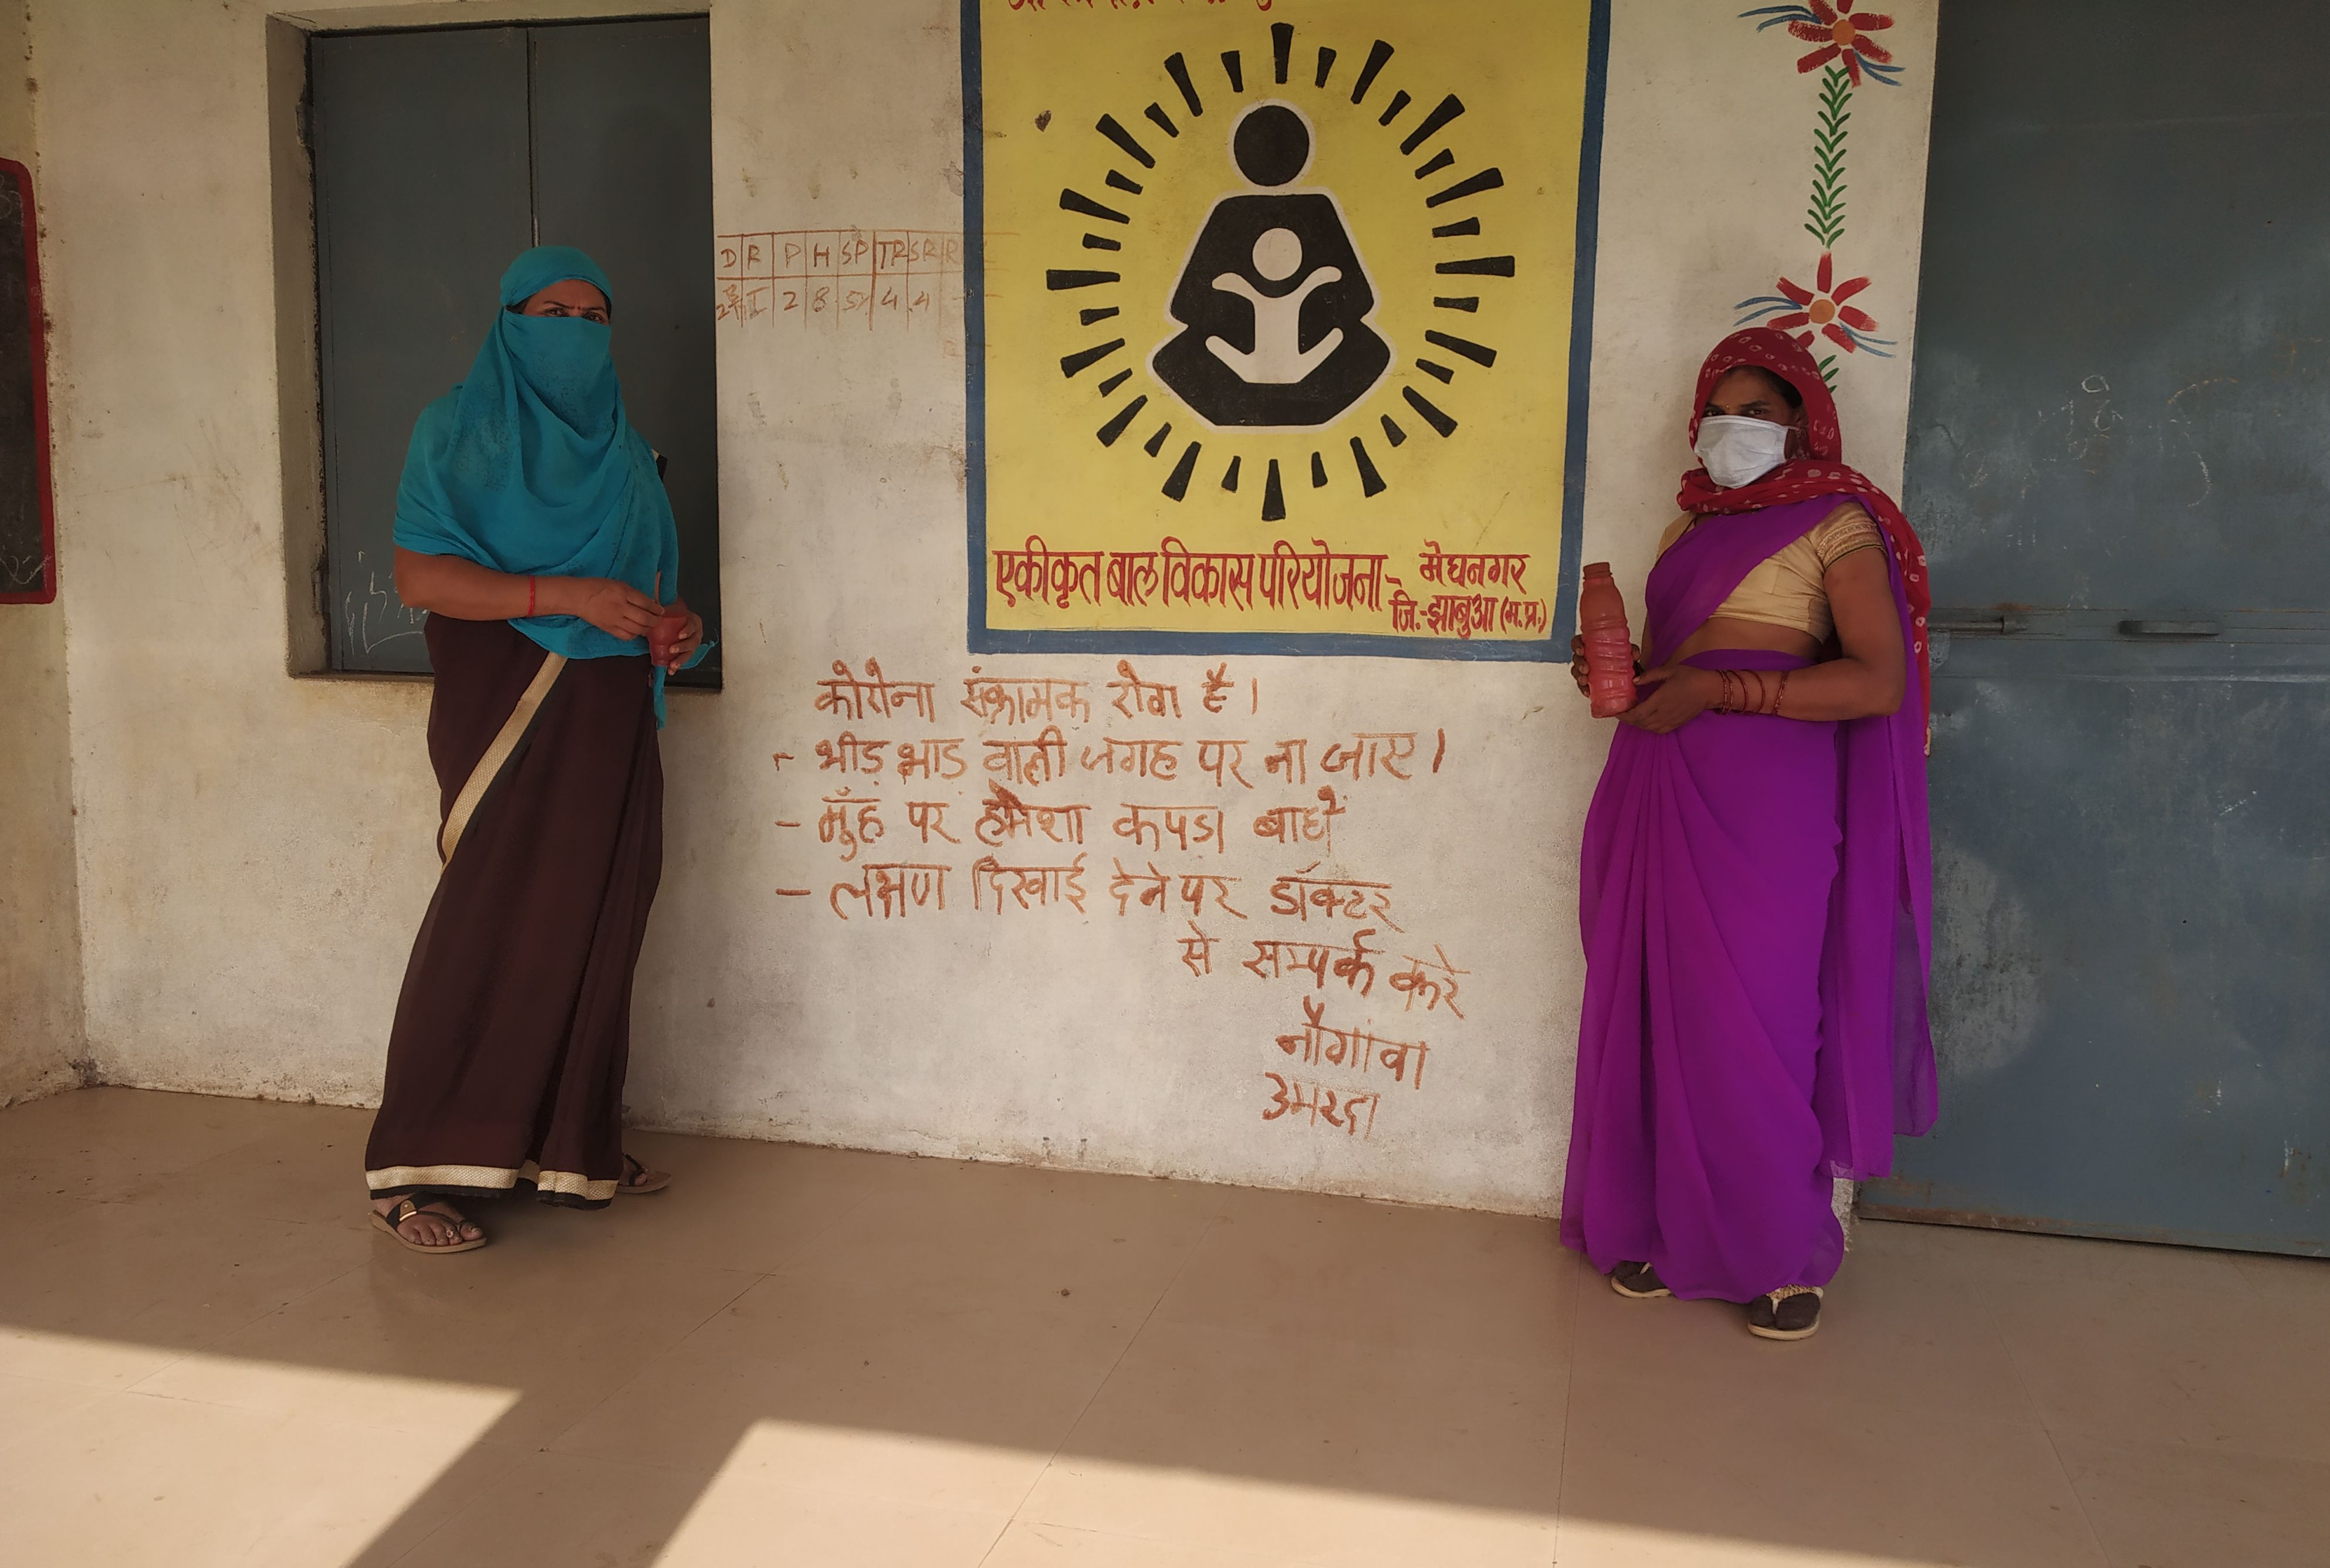 ANM and ASHA workers in the villages are informing the people on protocols that must be followed to prevent spread of infection (Image: INREM)